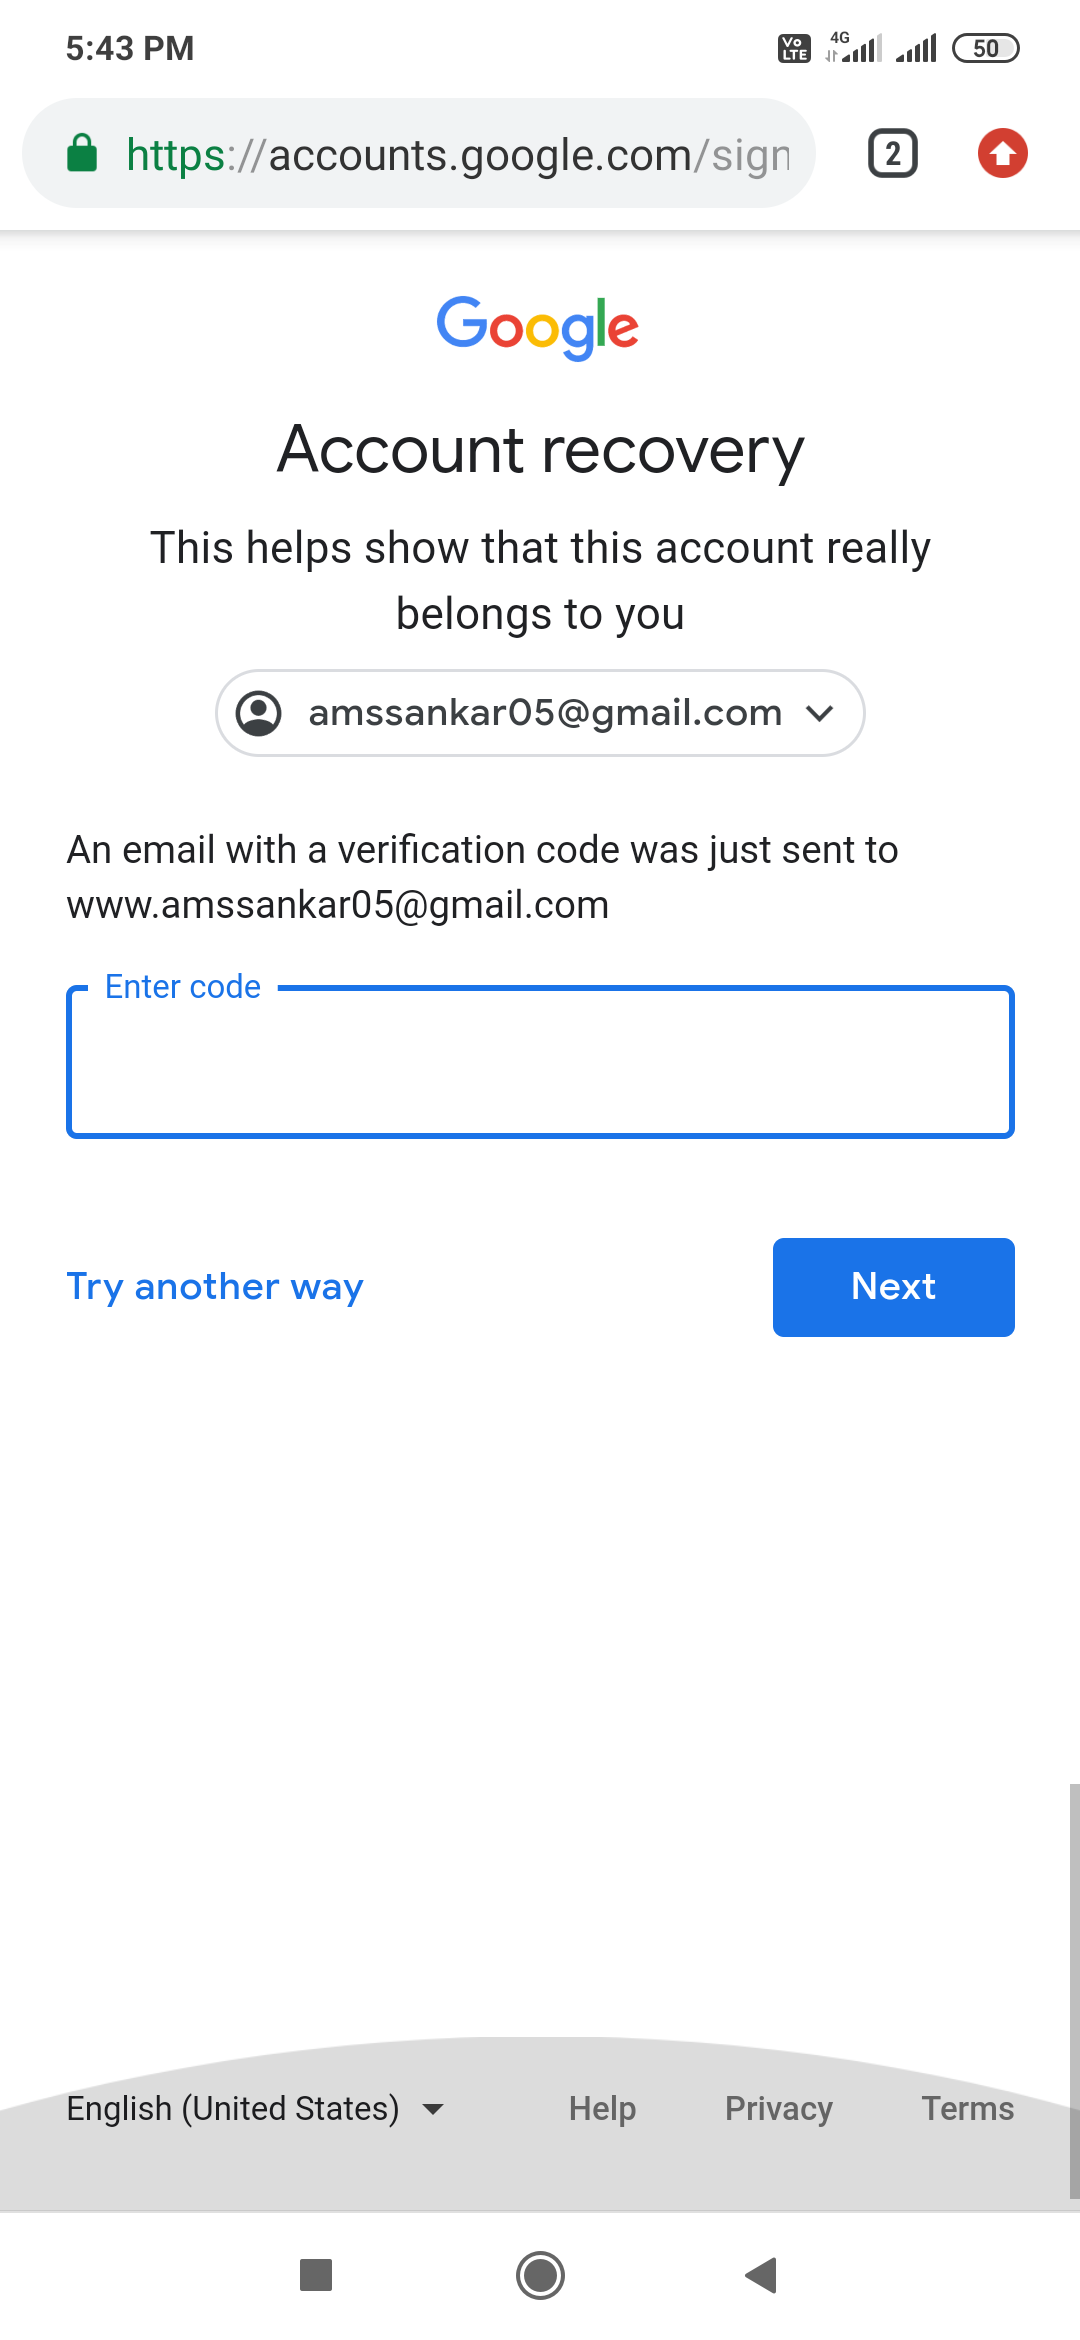 How can I access my old Gmail account without password?